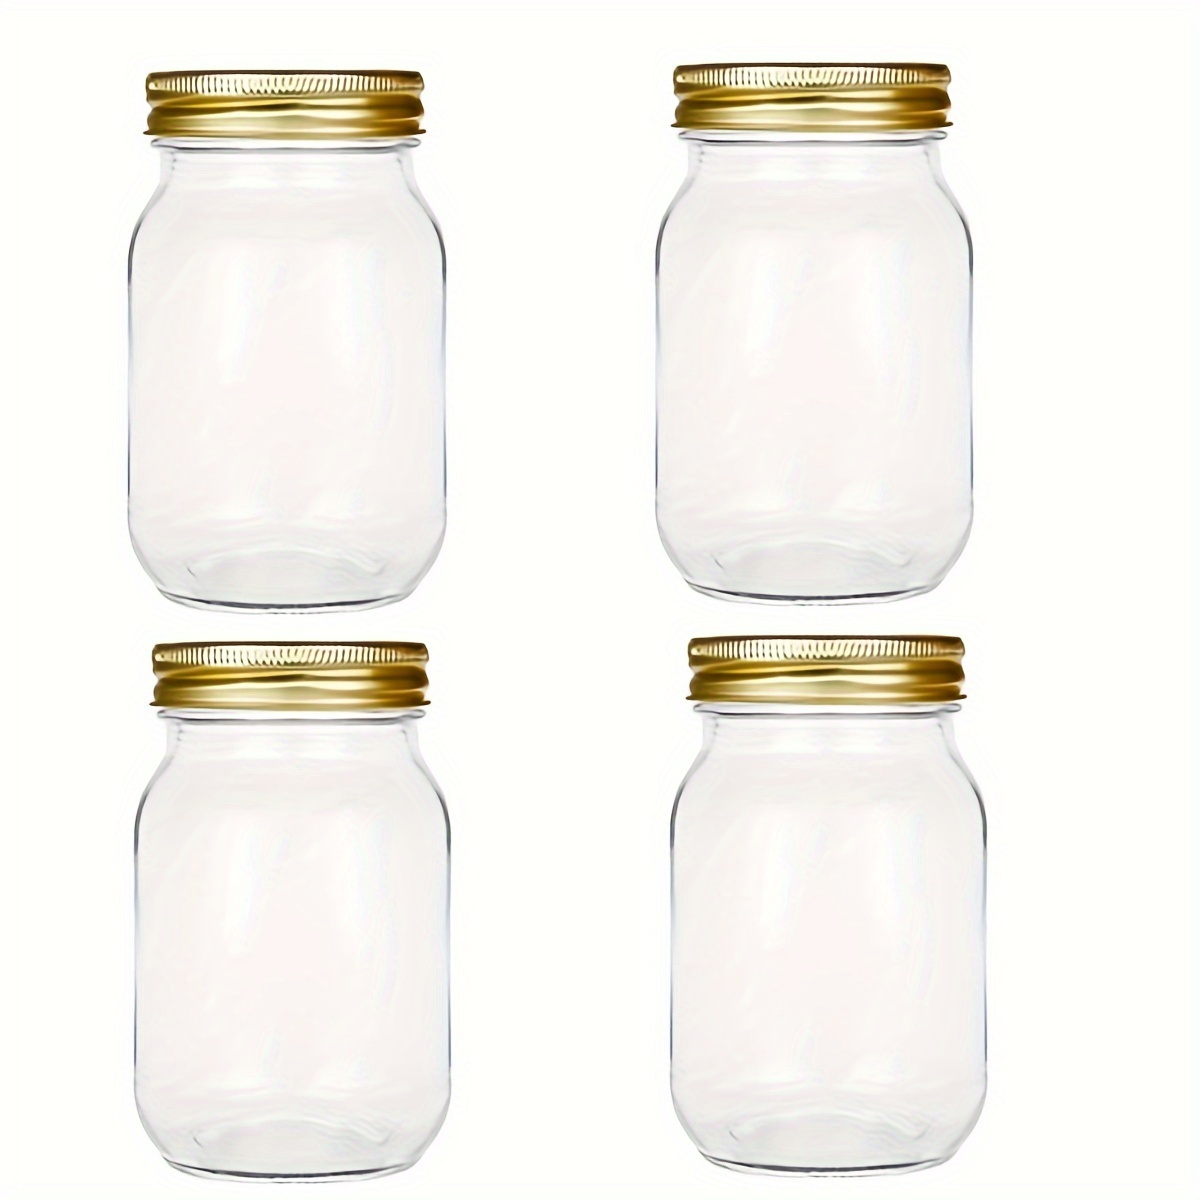 Plastic Mason Jars with Straw Set 24 oz. Set of 10, Bulk Pack - Jars for  Overnight Oats, Candies, Fruits, Pickles, Spices, Beverages - Clear 